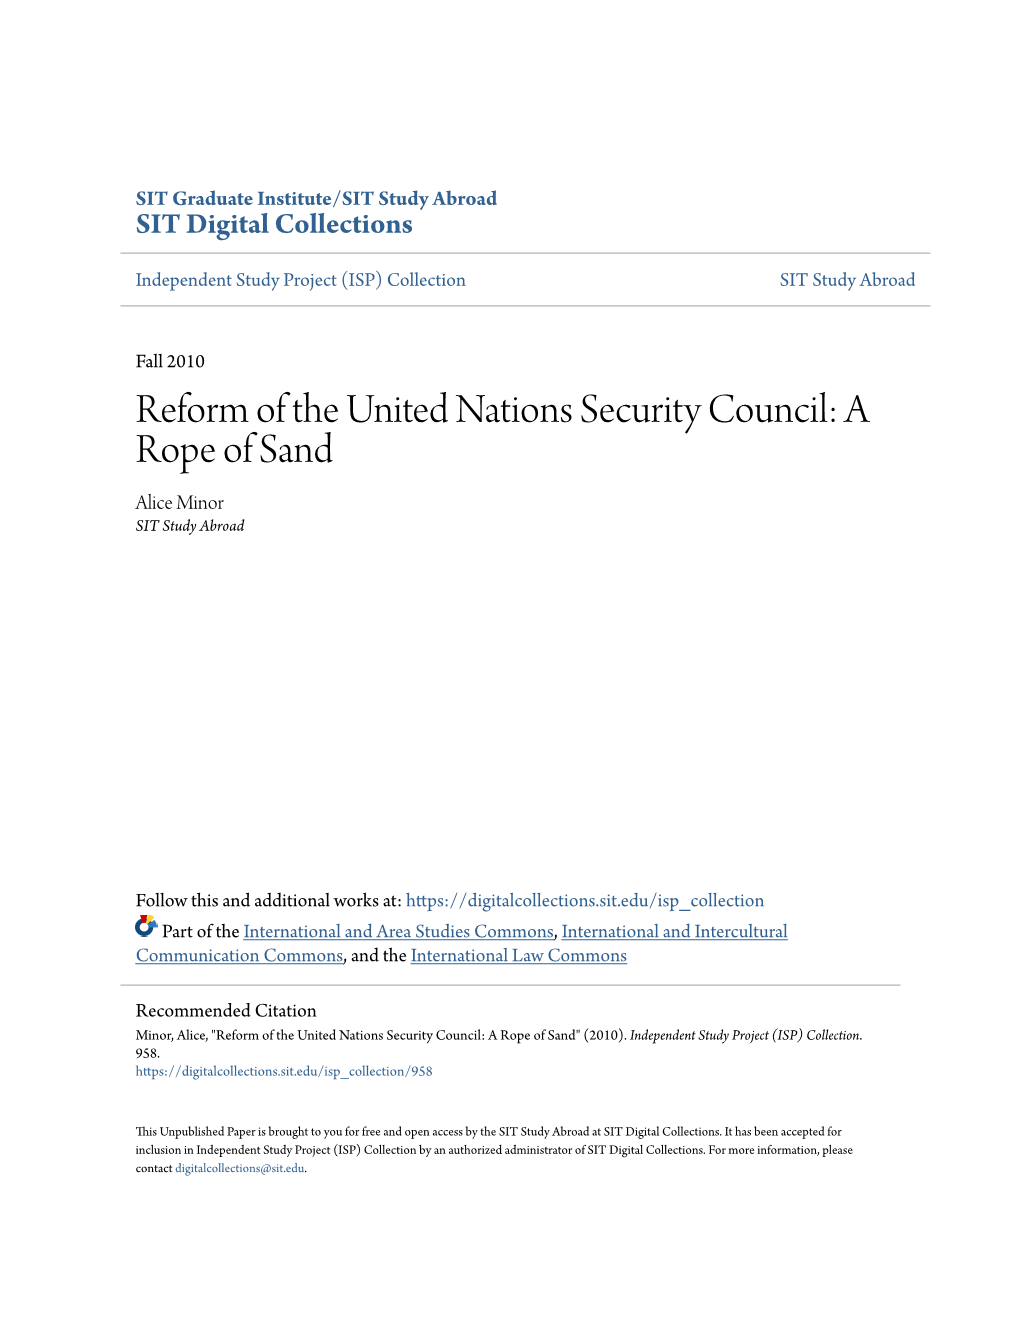 Reform of the United Nations Security Council: a Rope of Sand Alice Minor SIT Study Abroad